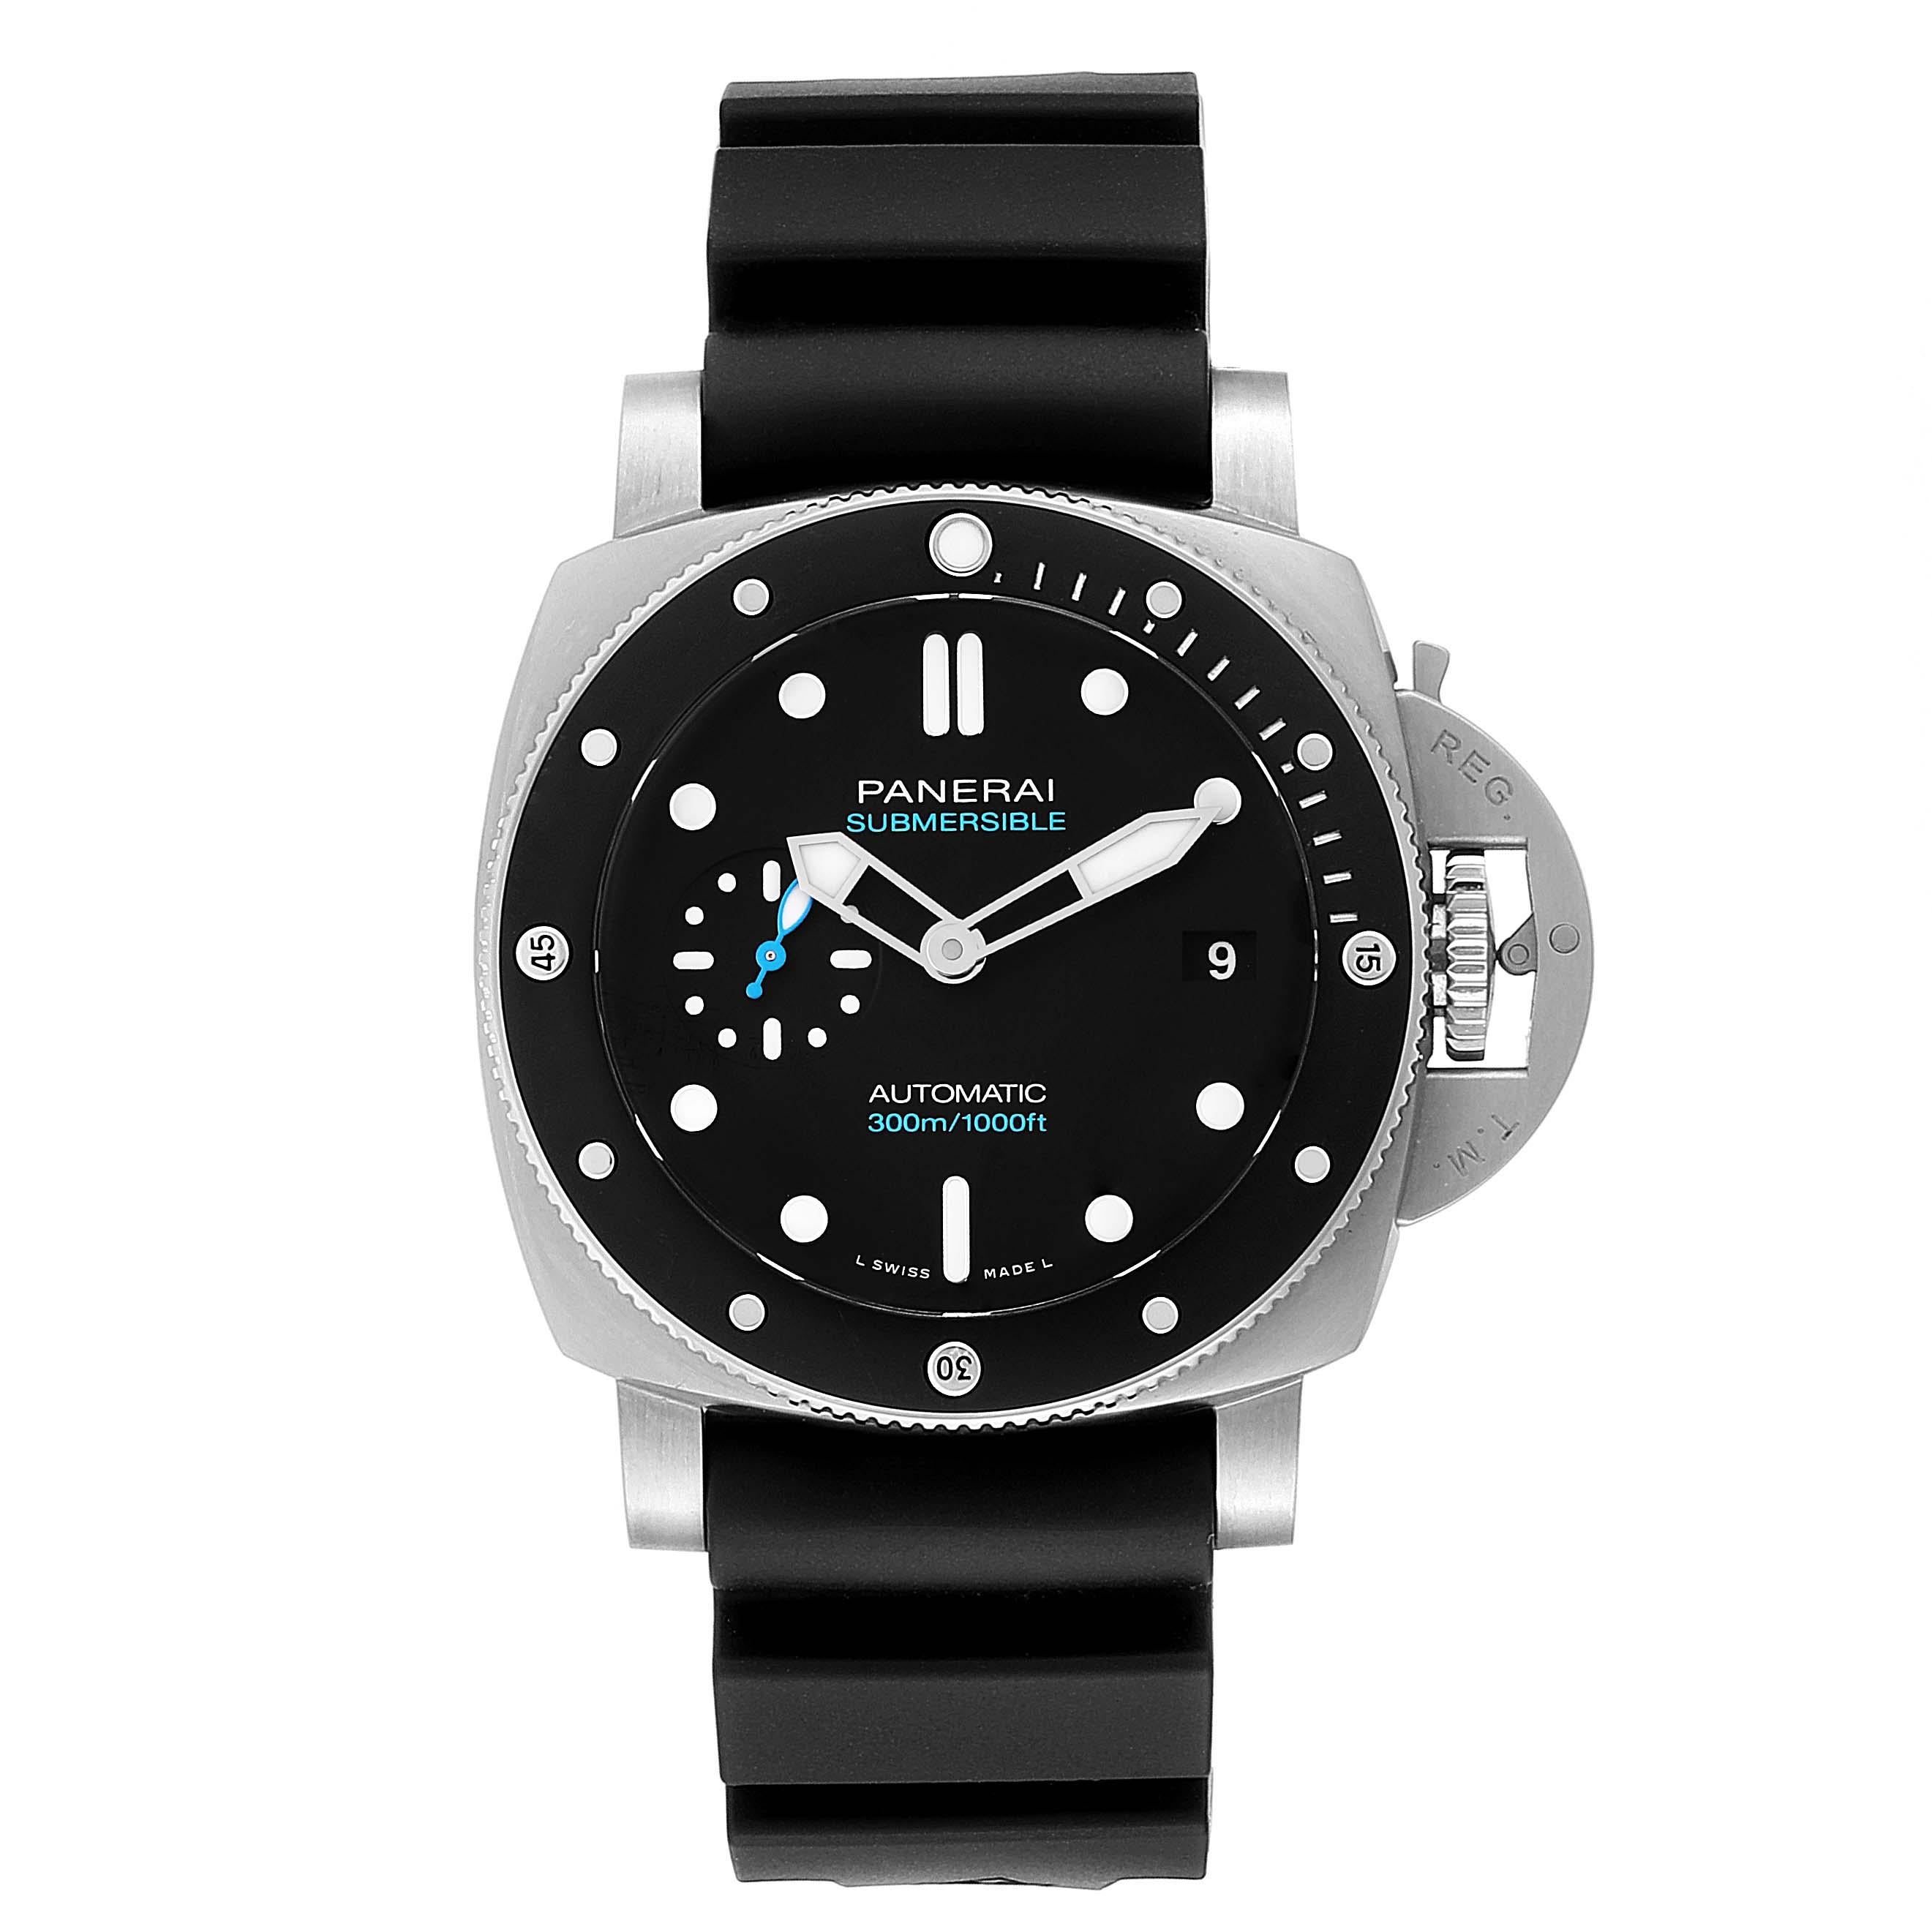 Panerai Luminor Submersible 42mm Black Rubber Strap Mens Watch PAM00683. Automatic self-winding movement. Two part cushion shaped stainless steel case 42.0 mm in diameter. Panerai patented crown protector. Steel with ceramic anti-clockwise rotating